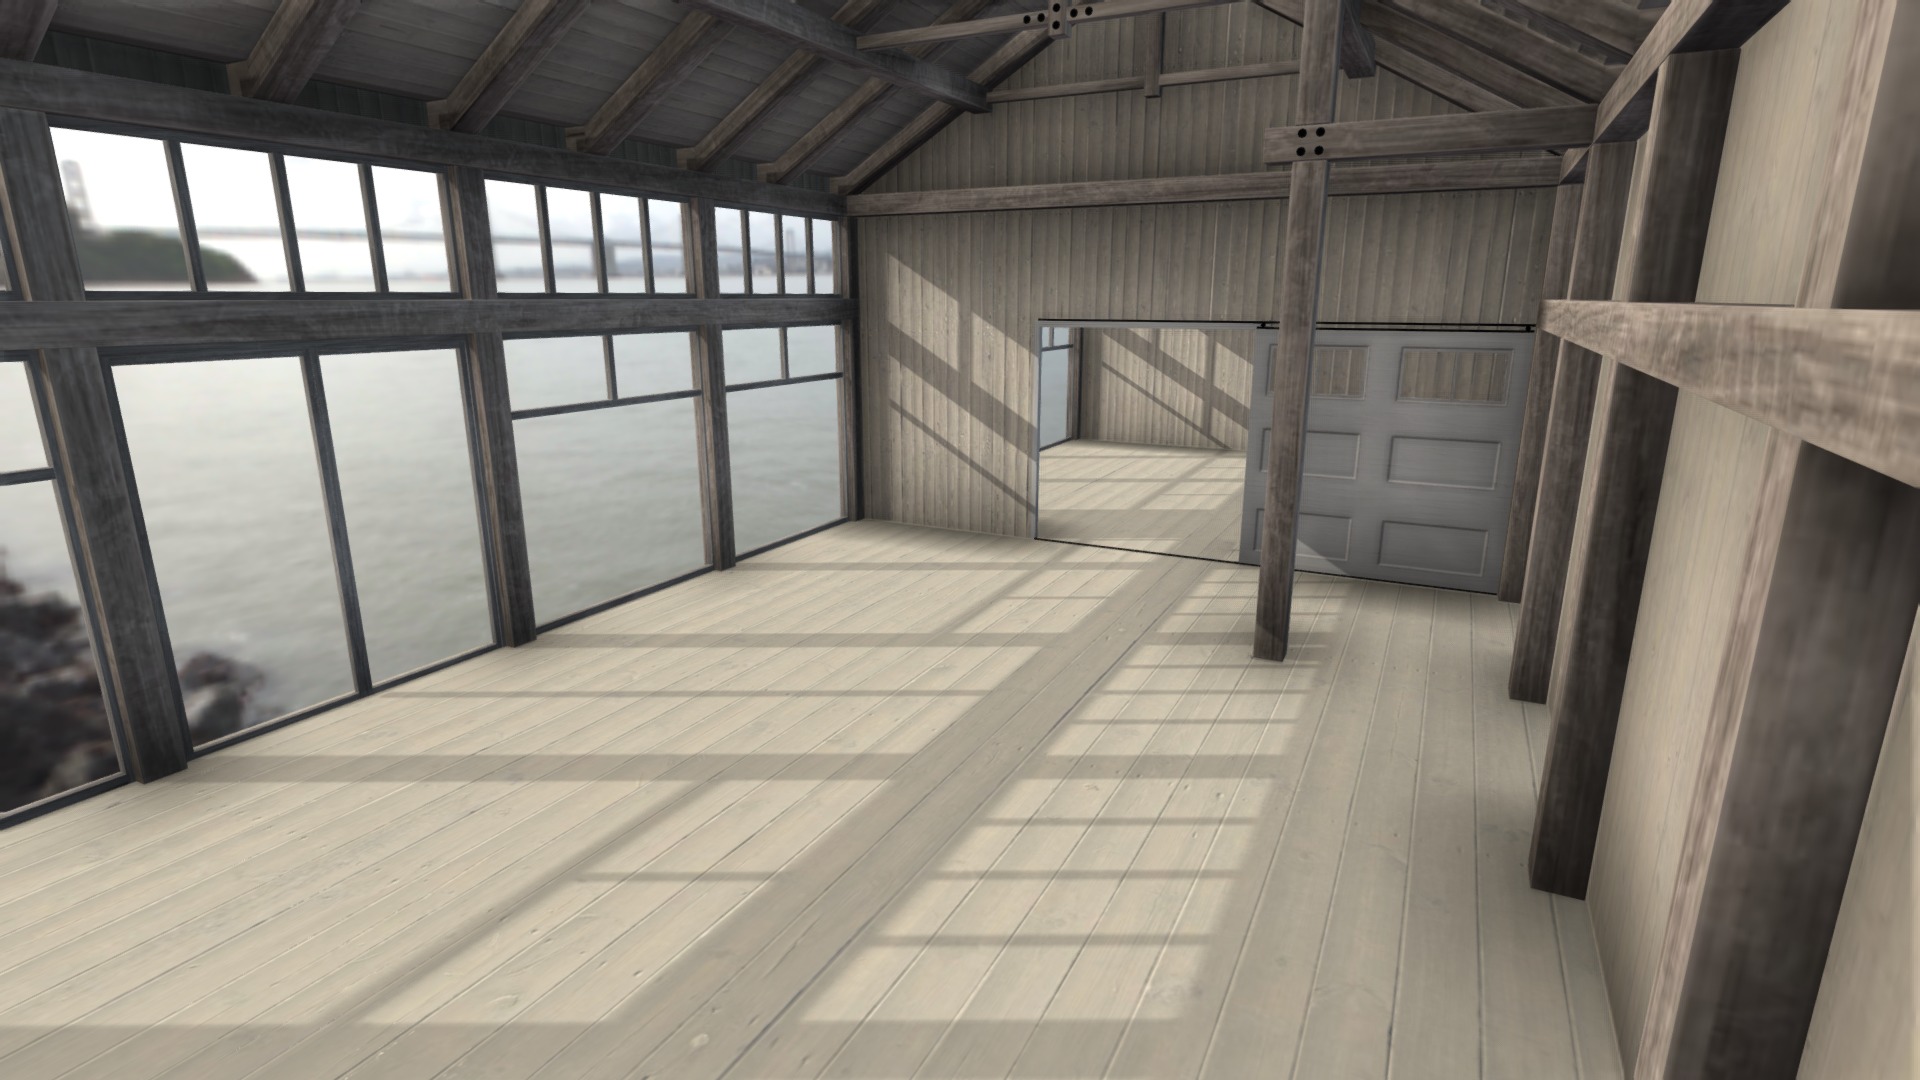 3D model Wooden Hangar - This is a 3D model of the Wooden Hangar. The 3D model is about a wooden deck with windows.